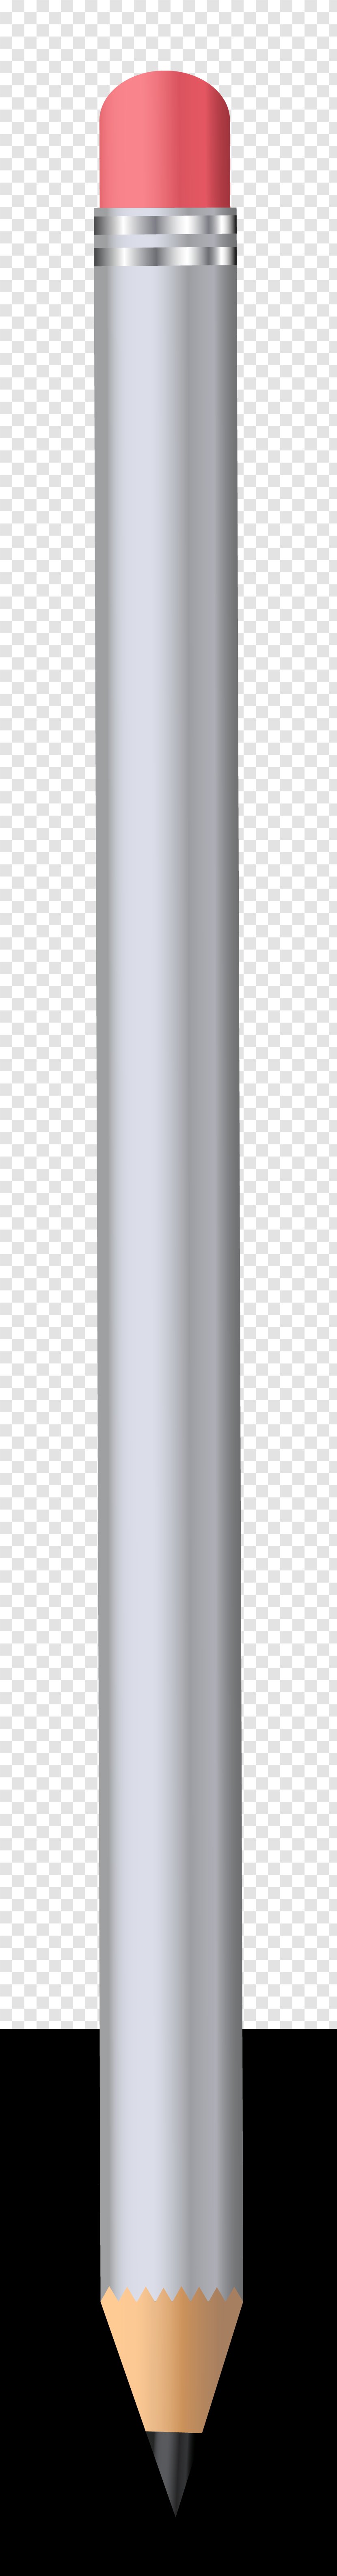 Cylinder Design Product - School - Silver Pencil Clipart Image Transparent PNG